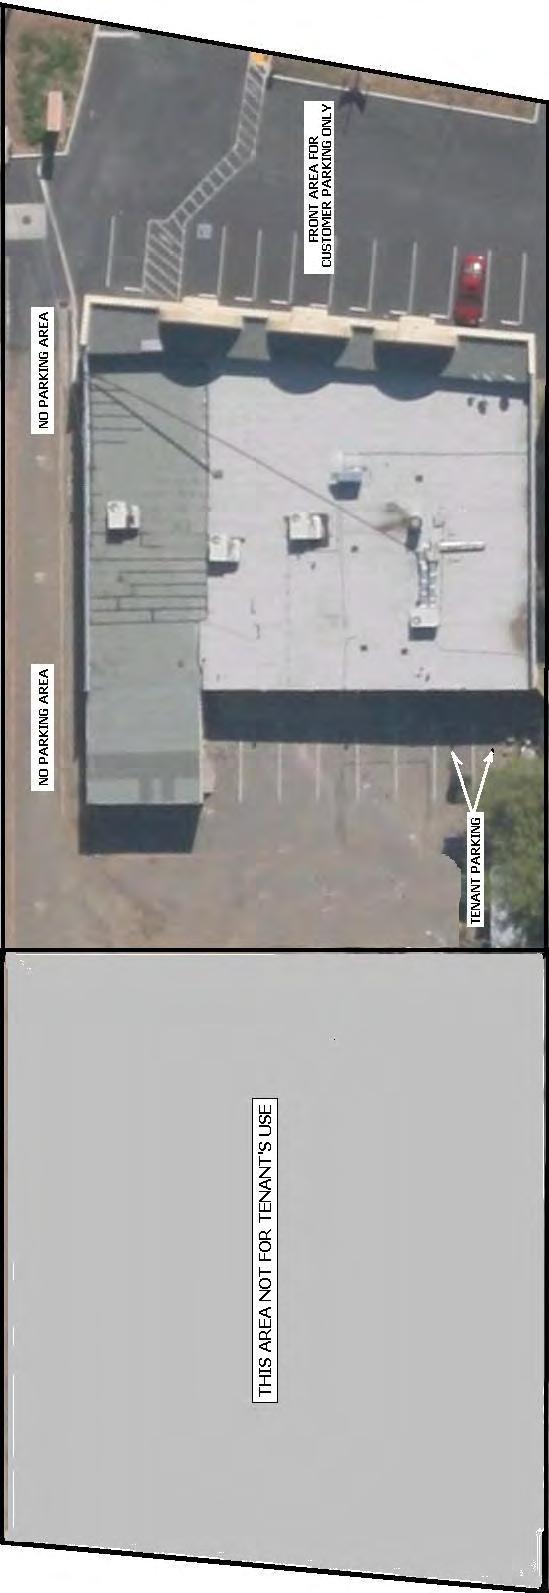 AERIAL SITE PLAN 4445-4447 AUBURN BLVD, SACRAMENTO, CA THE INFORMATION PROVIDED ABOVE AND HEREIN IS GIVEN WITH THE UNDERSTANDING THAT ALL NEGOTIATIONS RELATING TO THE PURCHASING AND/OR LEASING OF THE